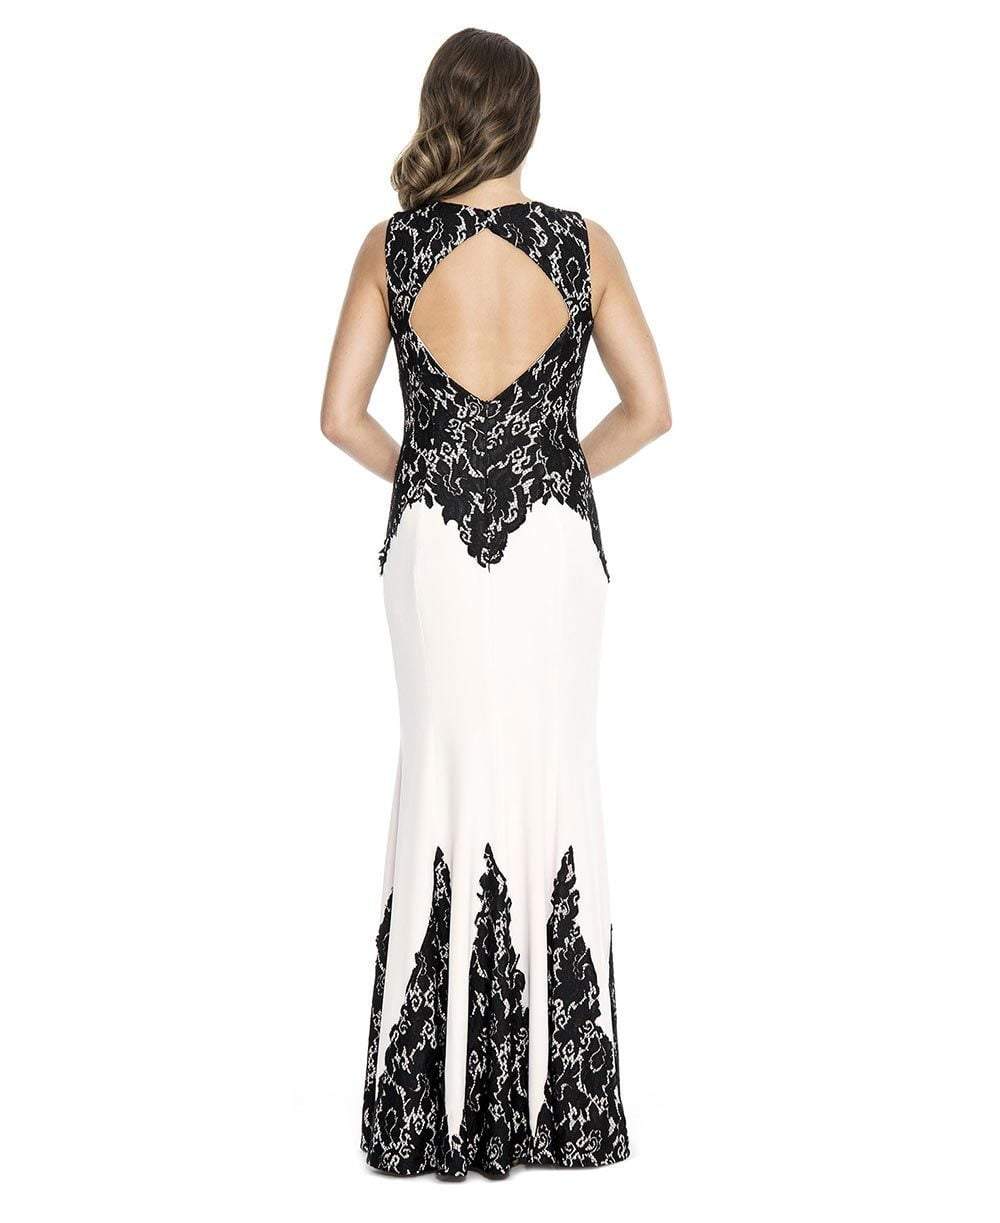 Decode 1.8 - 183973 Embroidered Fitted Jewel Evening Dress in Black and White